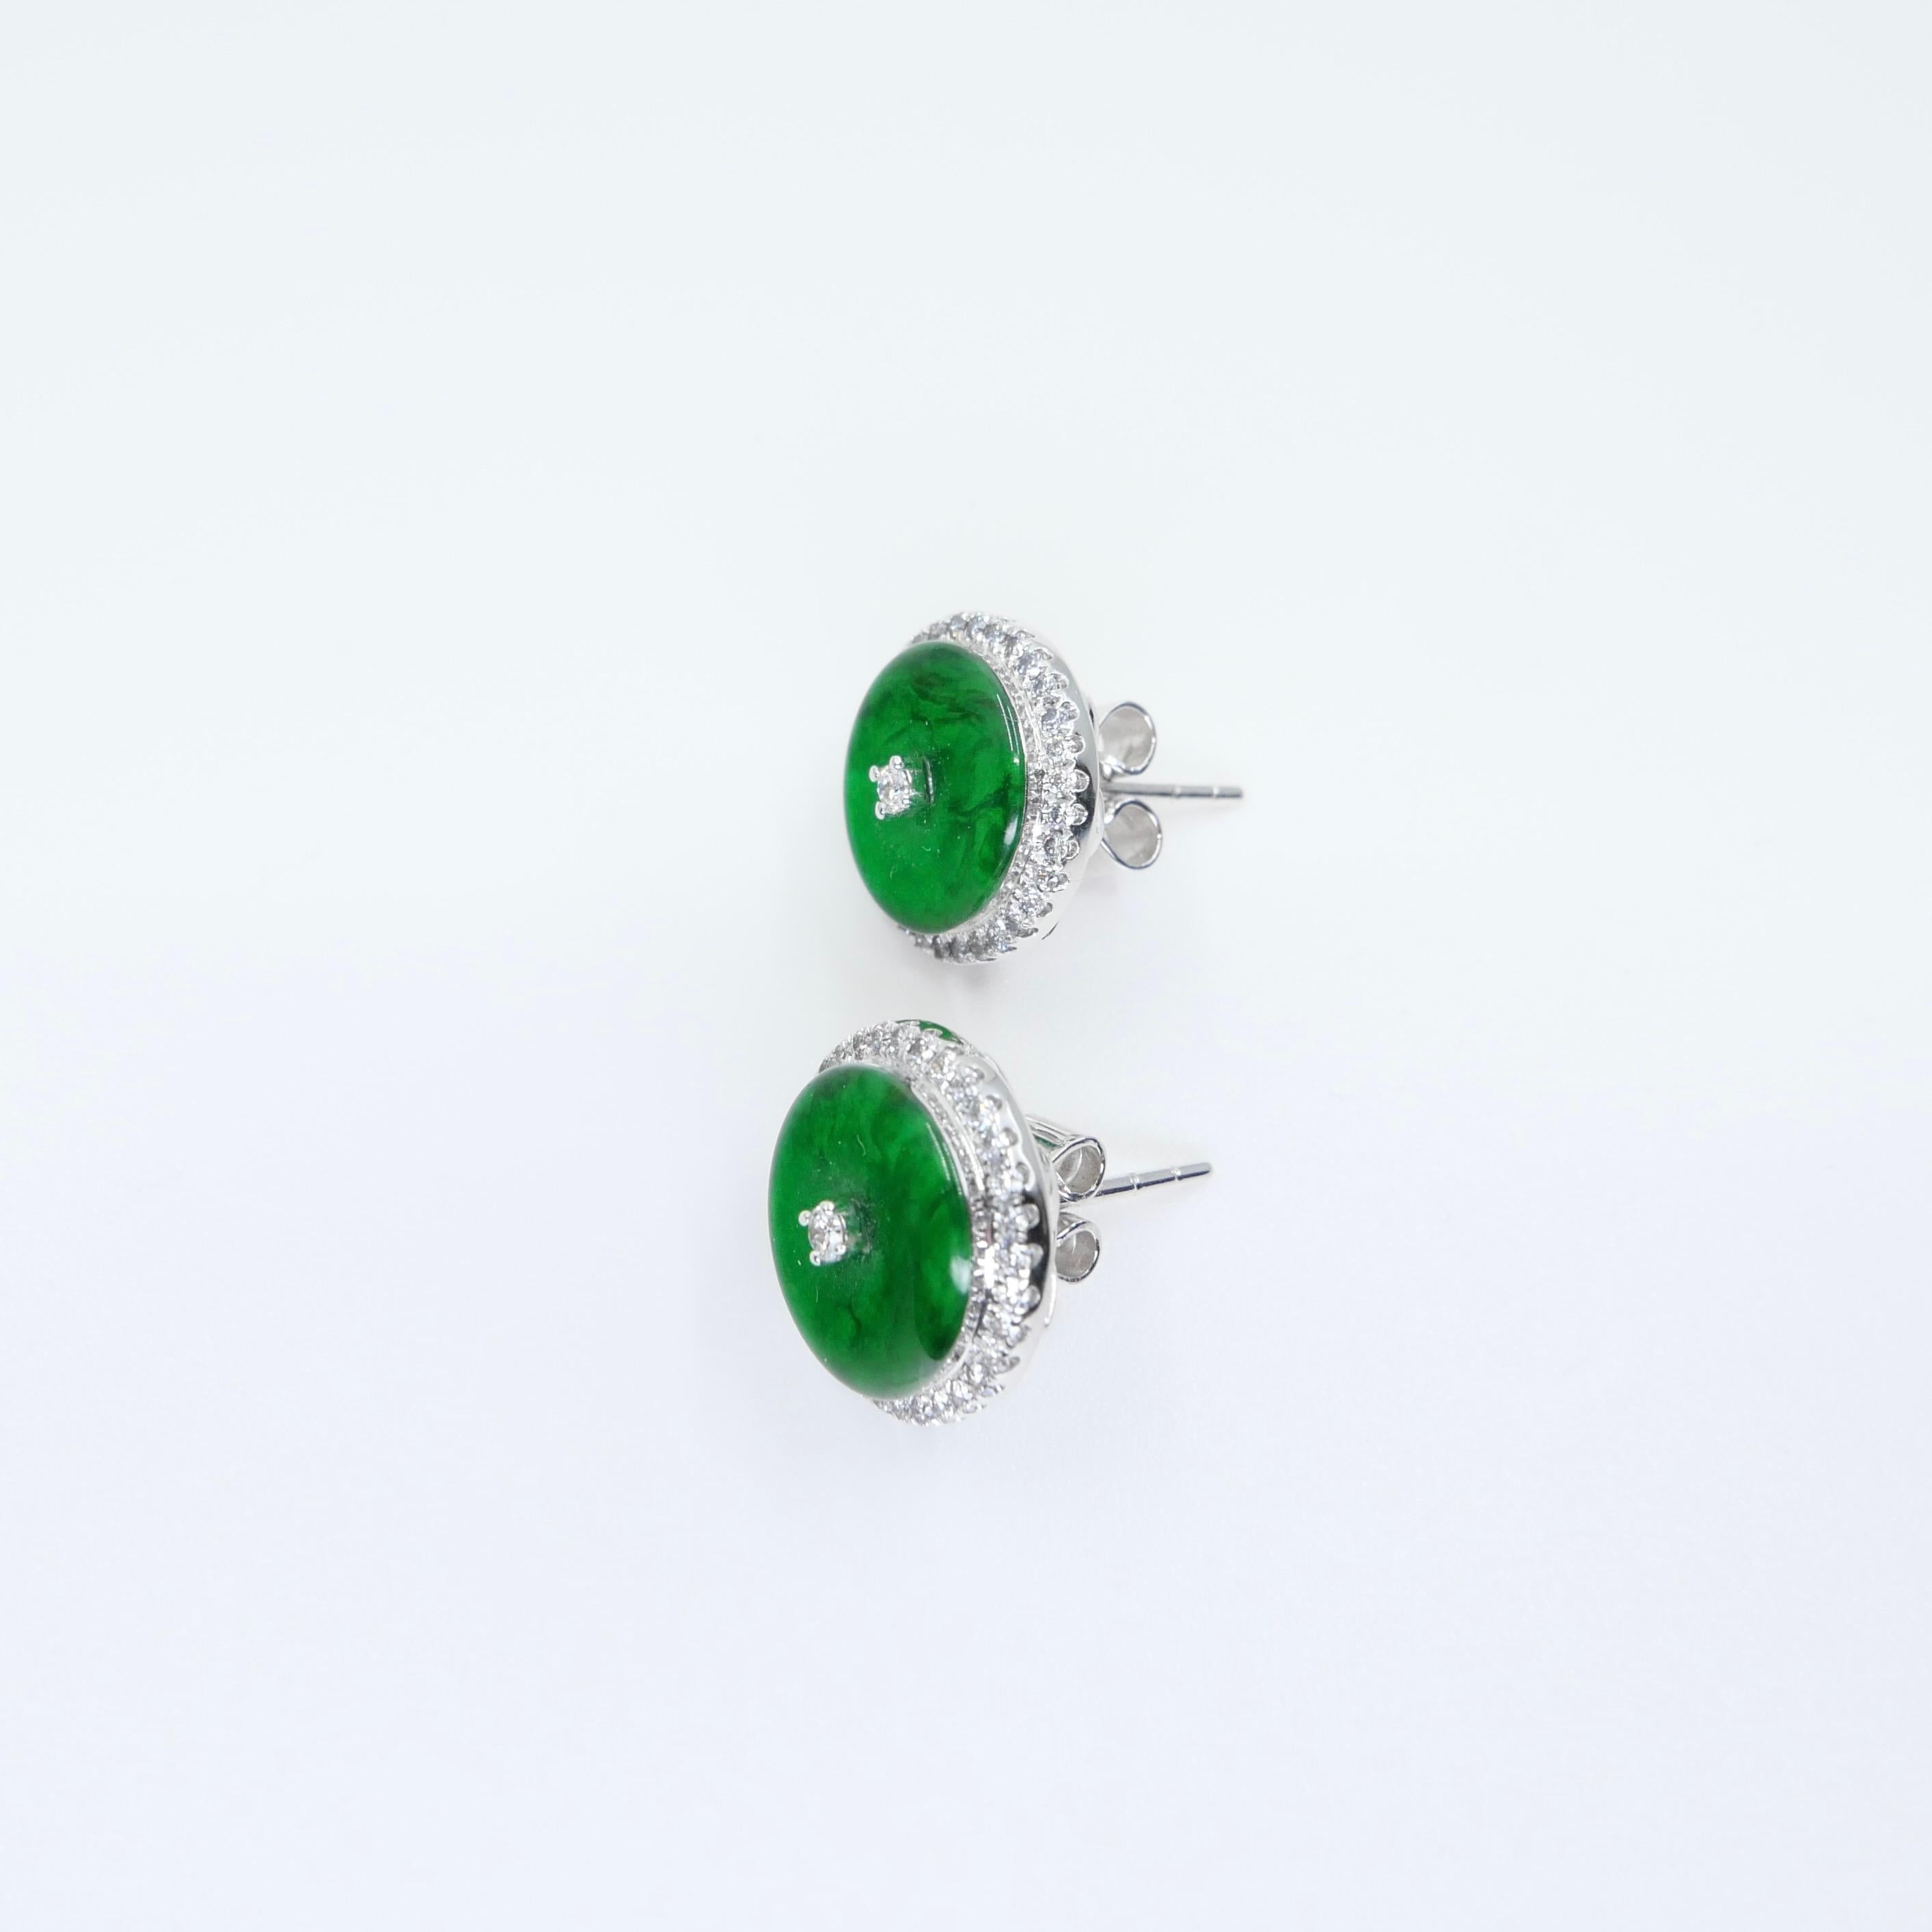 Certified Natural Type A Jadeite Jade And Diamond Earrings. Apple Green Color 10